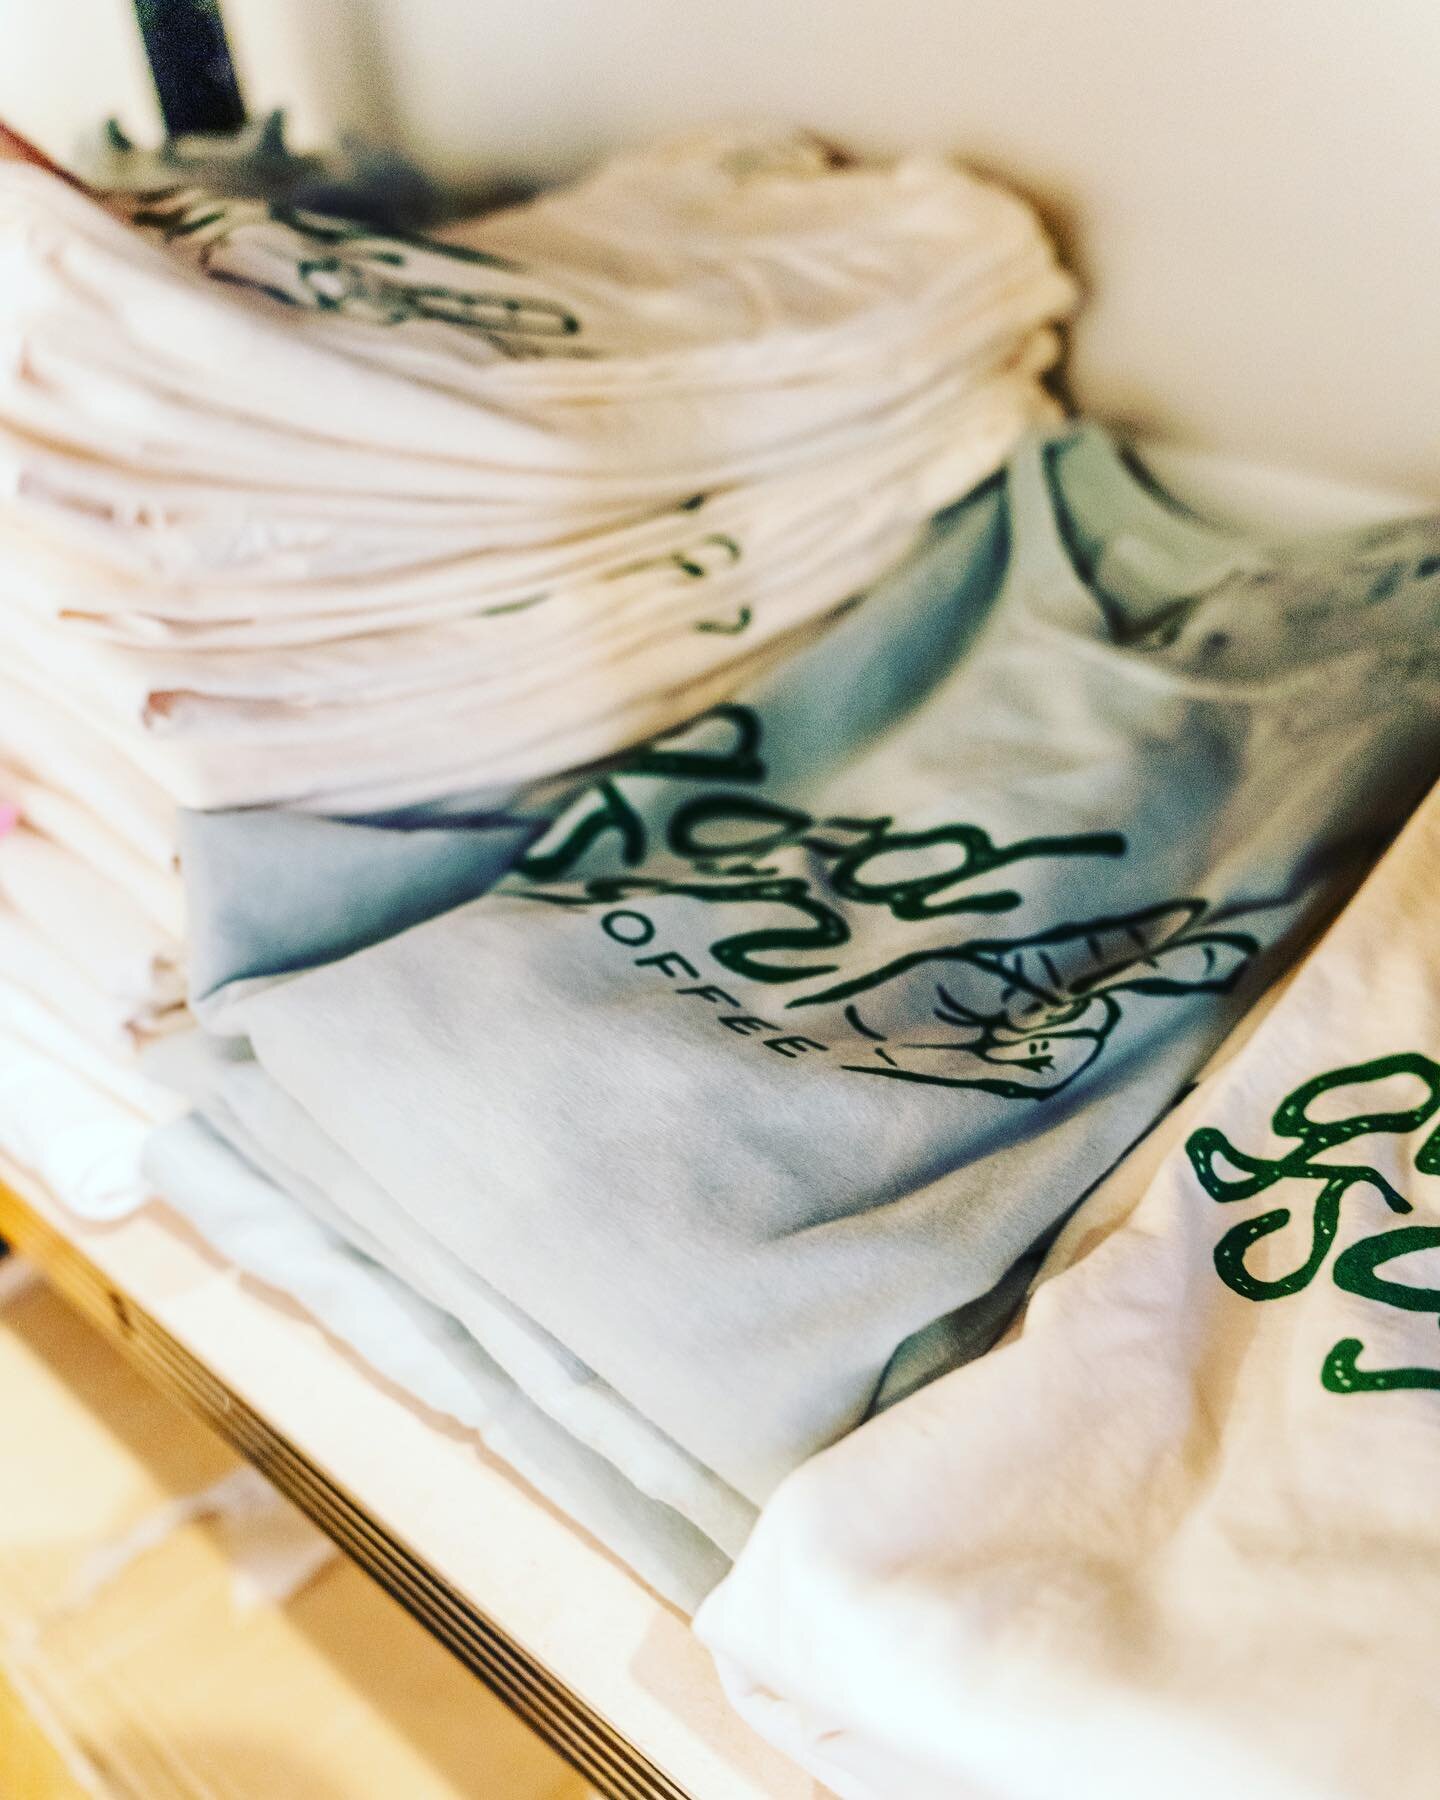 Love wearing local tees- have you tried ours? #comfortcolours